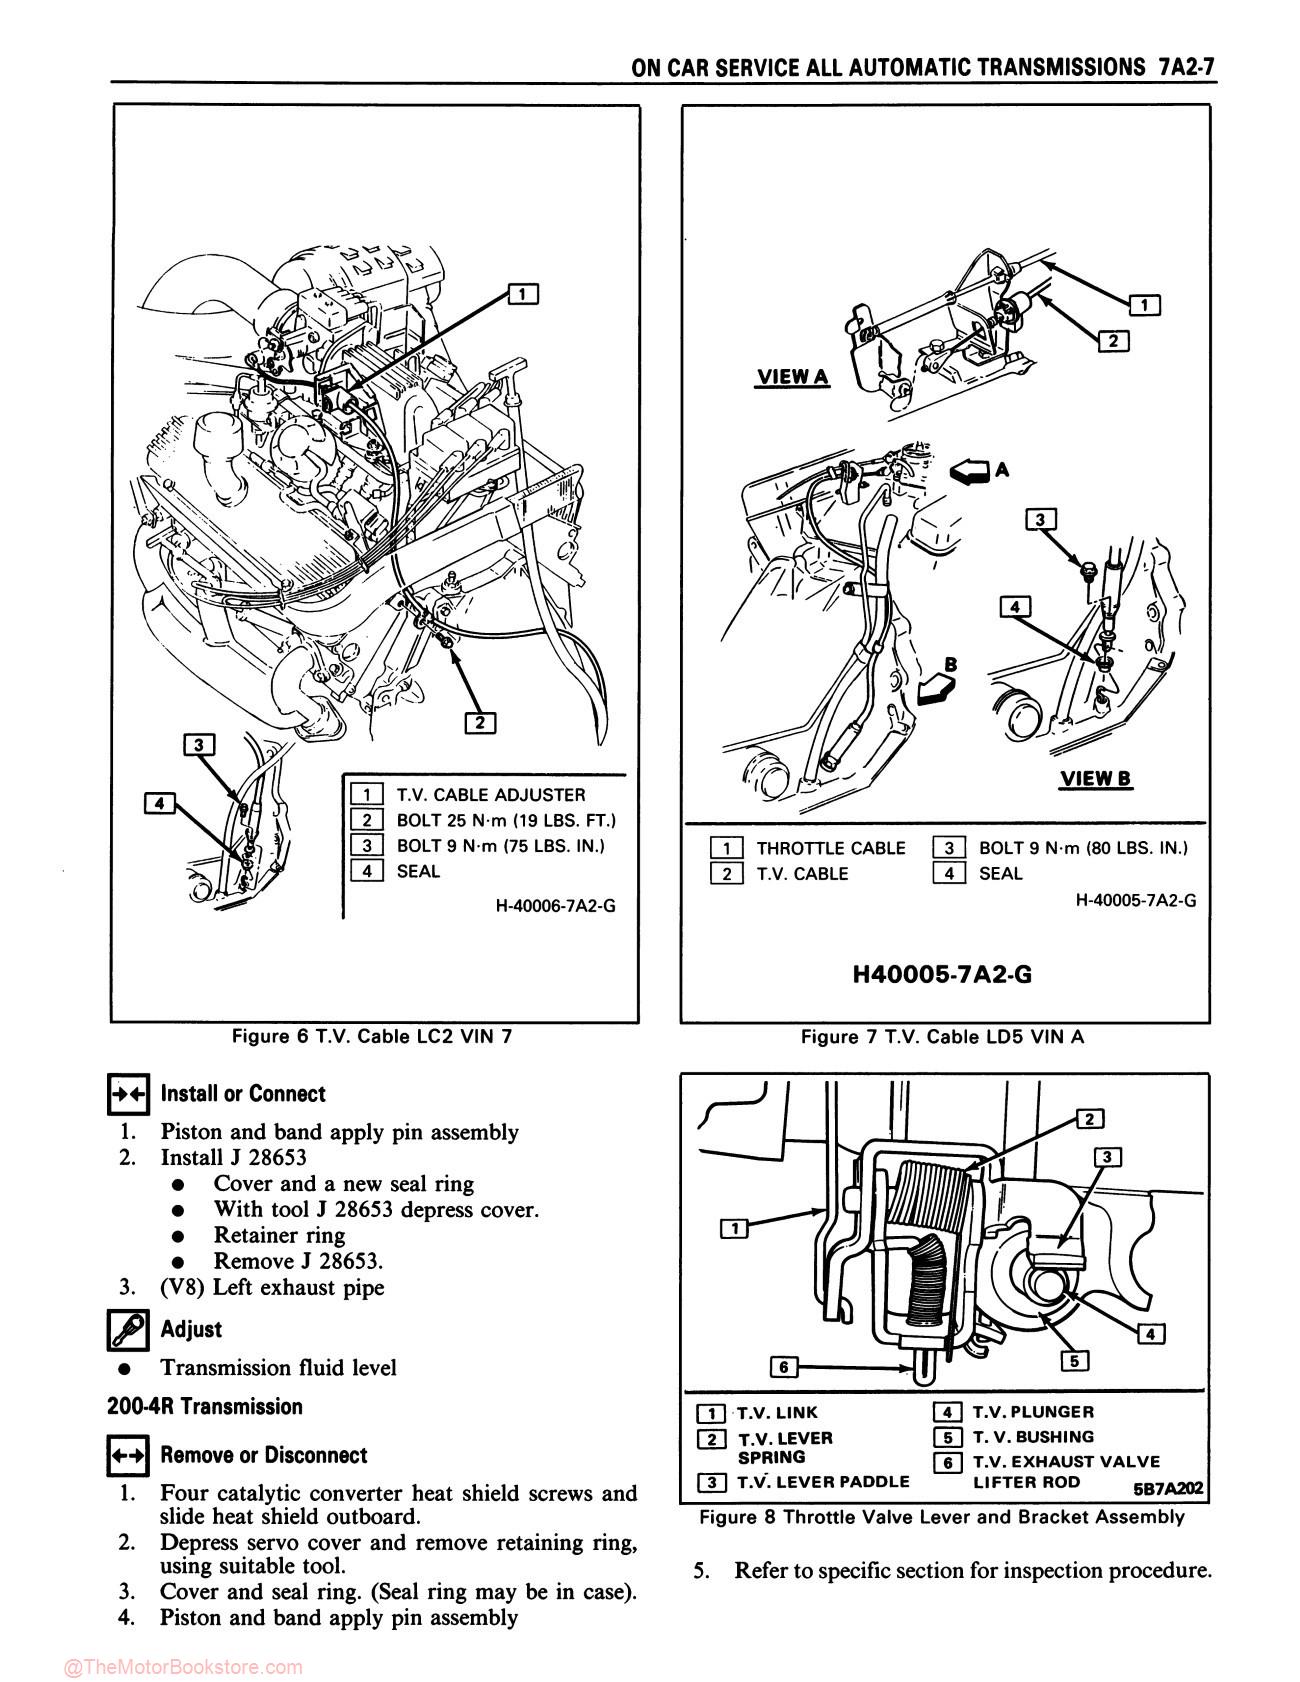 1987 Buick and Grand National Service Manual - Sample Page 5